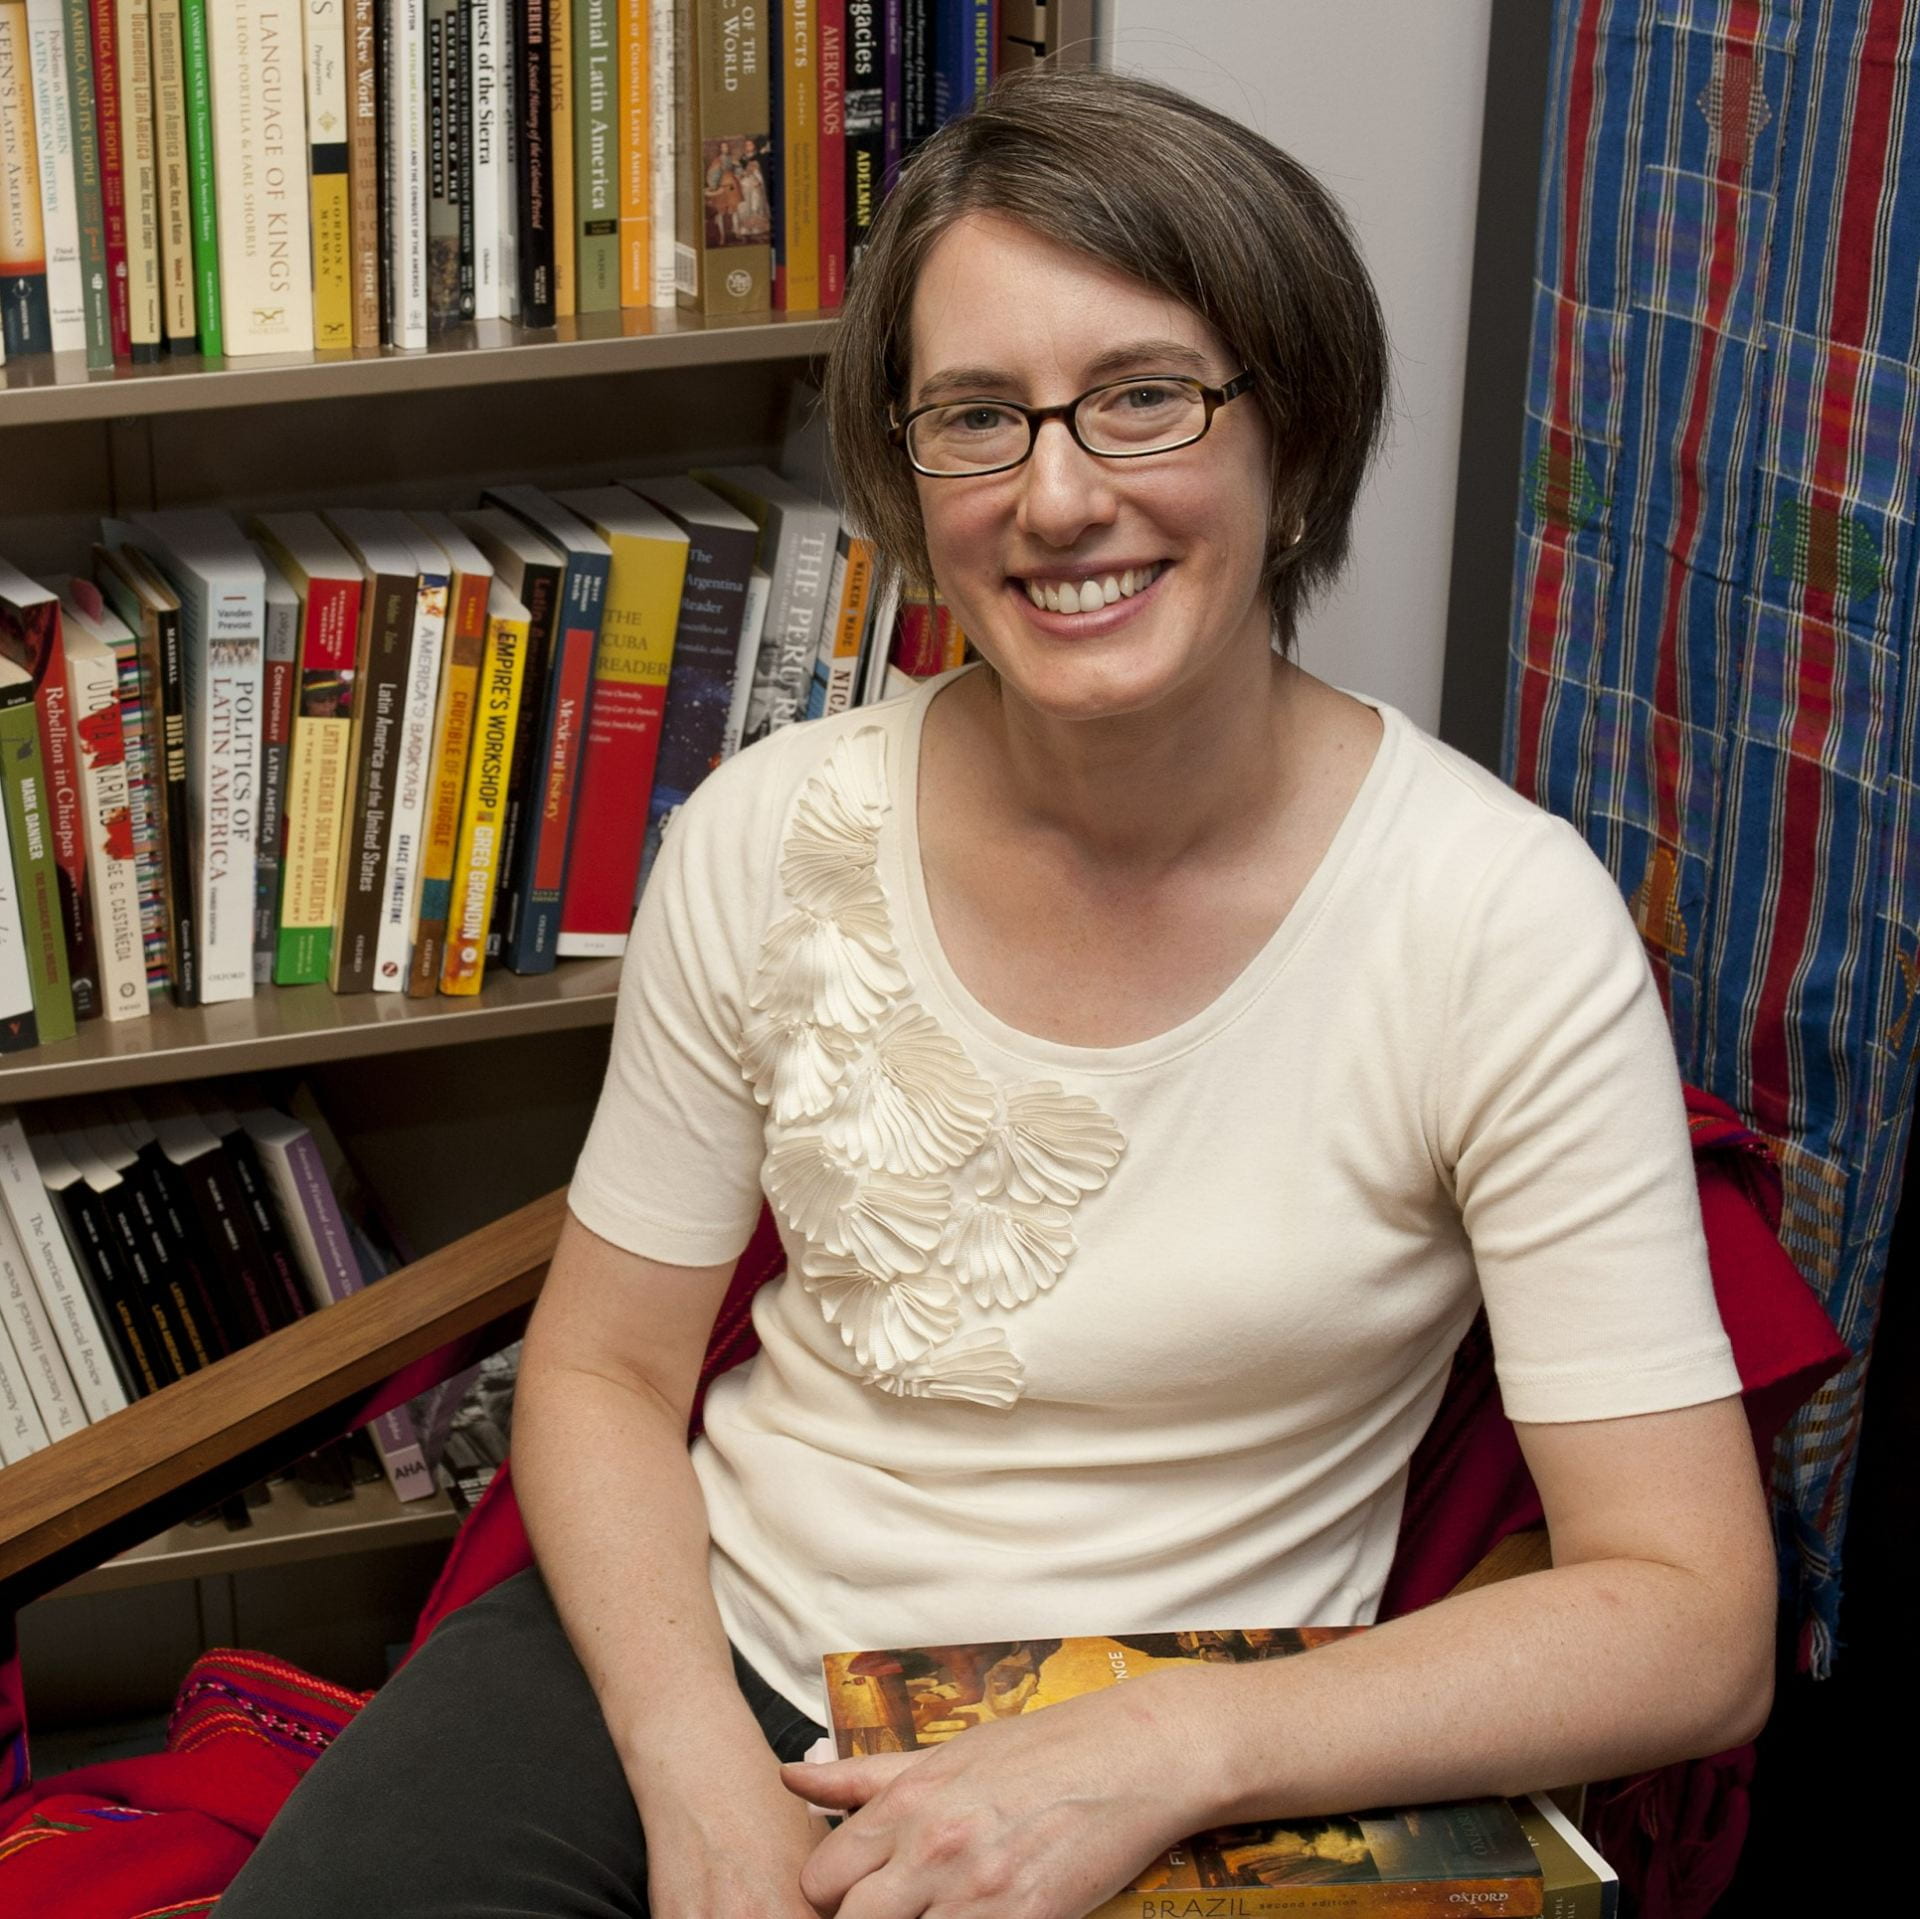 Prof. Buckley, a white, middle-aged woman with brown hair and glasses, wearing a short-sleeved white shirt, sits in a chair holding several books, with a full bookshelf and a colorful textile in the background.